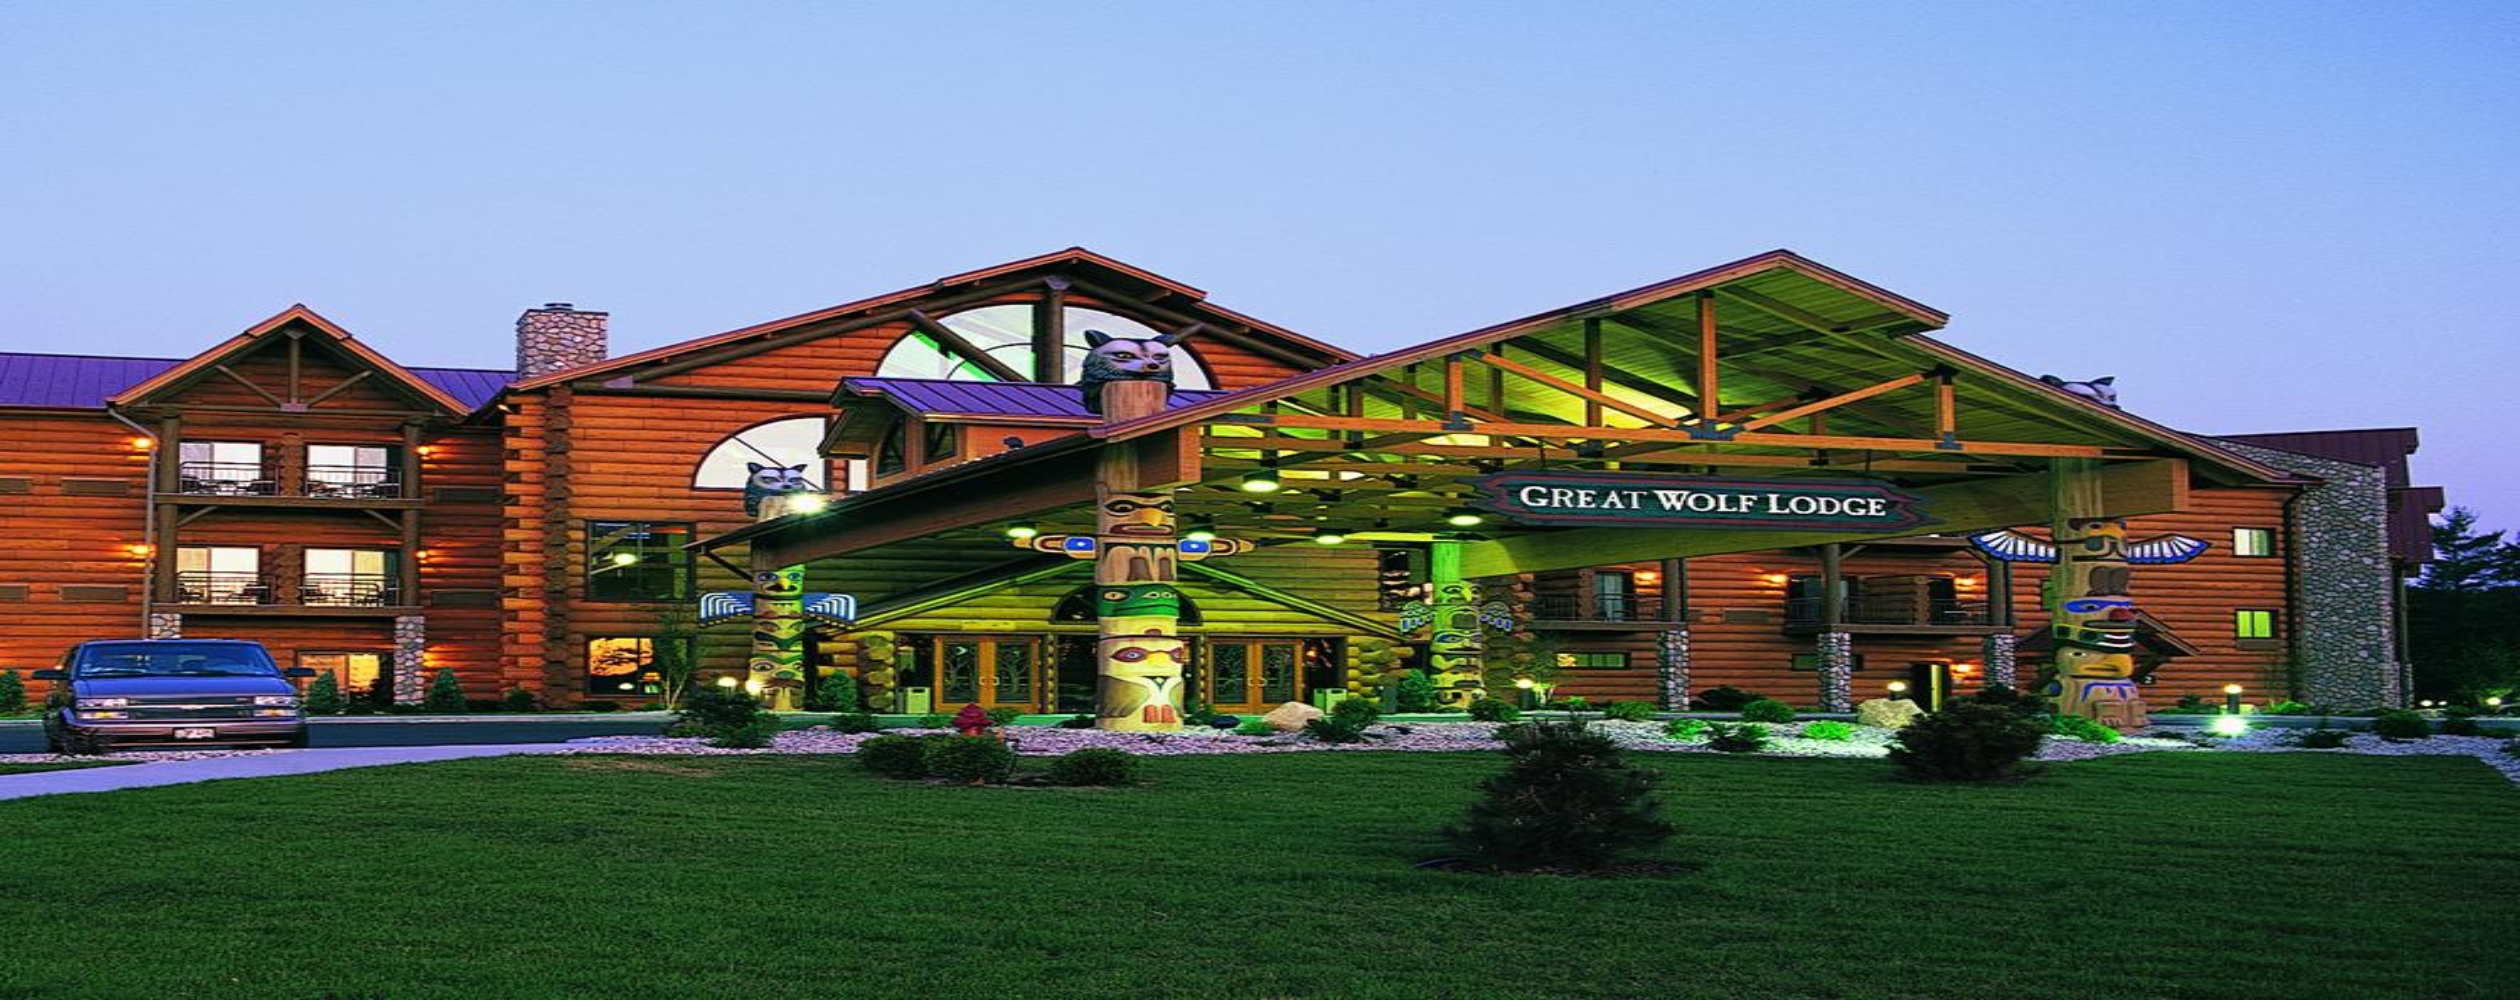 great wolf lodge wisconsin dells